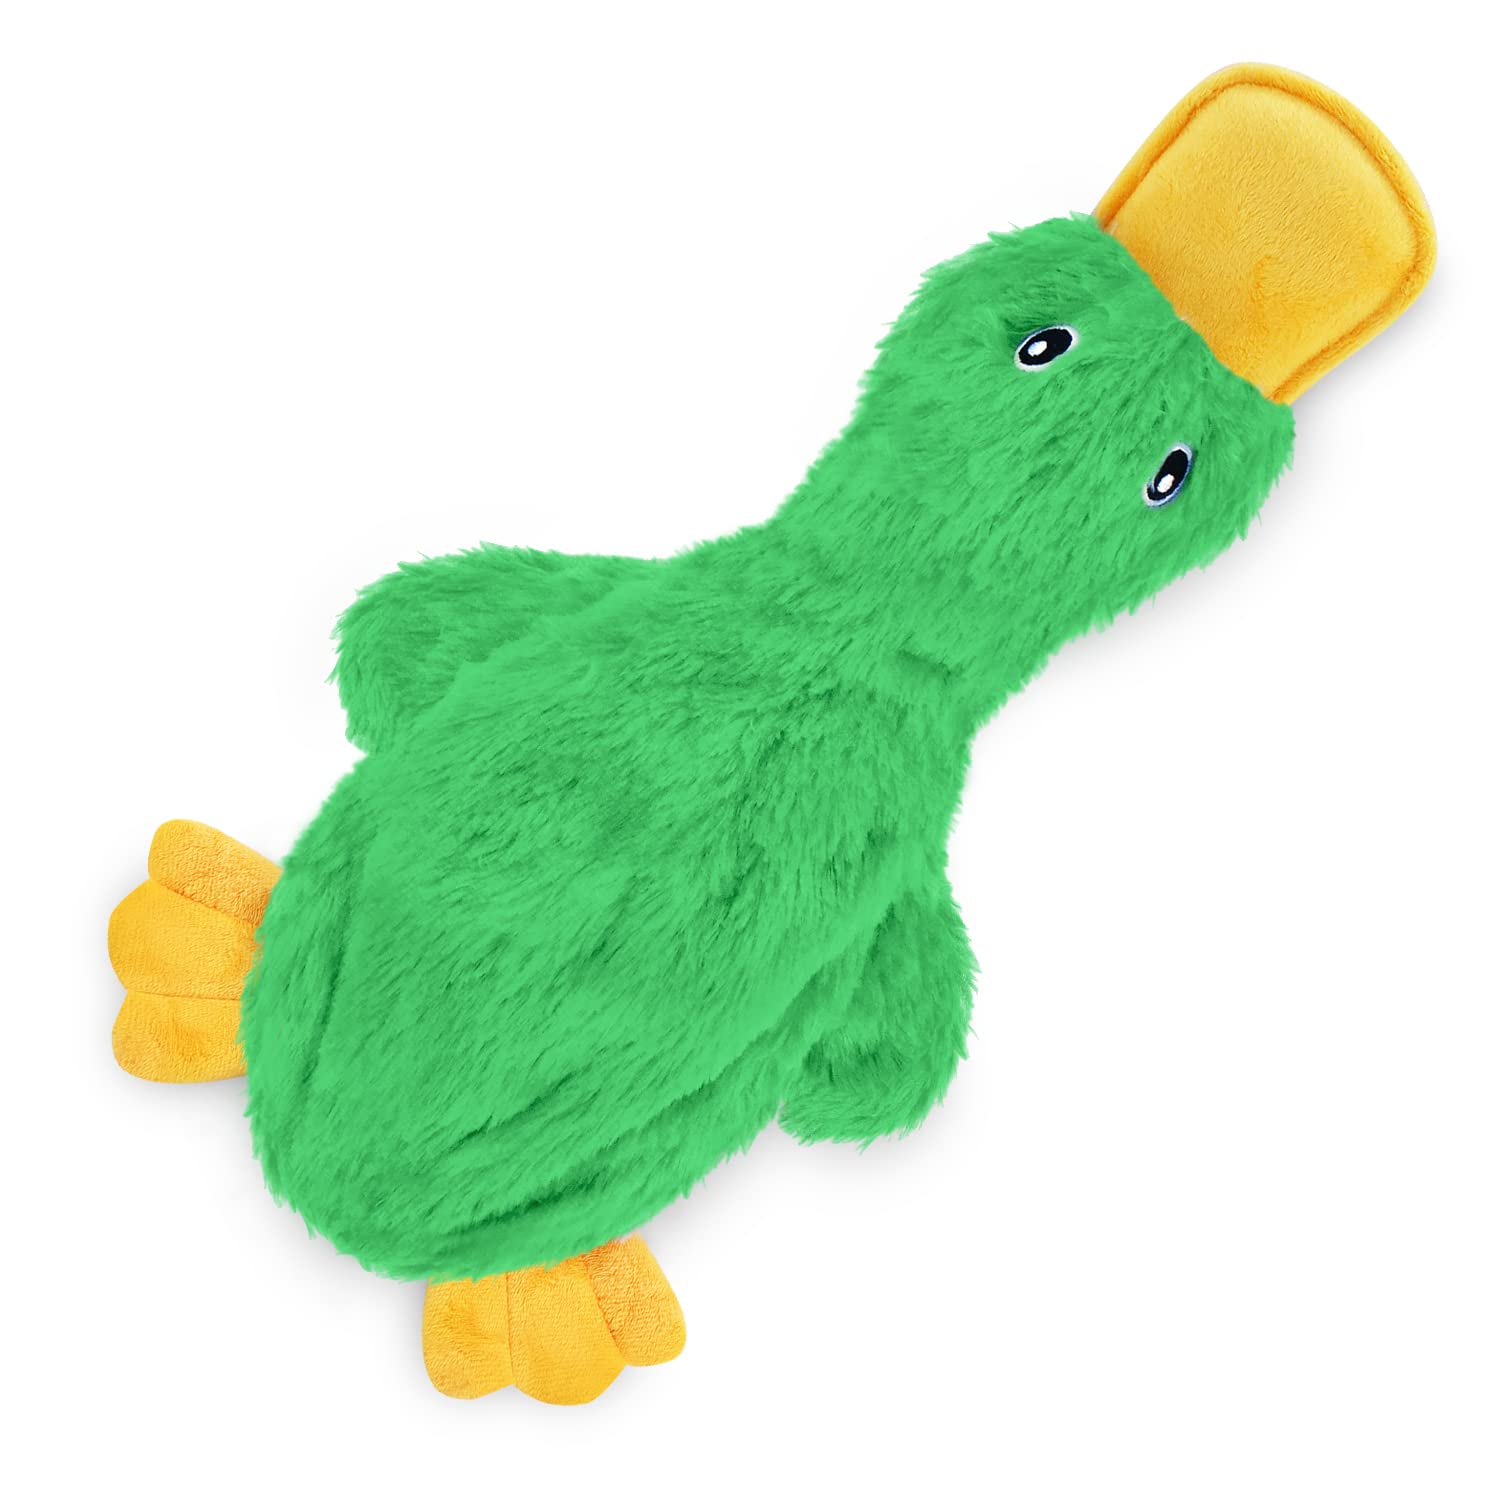 Best Pet Supplies Crinkle Dog Toy for Small, Medium, and Large Breeds, Cute No Stuffing Duck with Soft Squeaker - UK GEMS